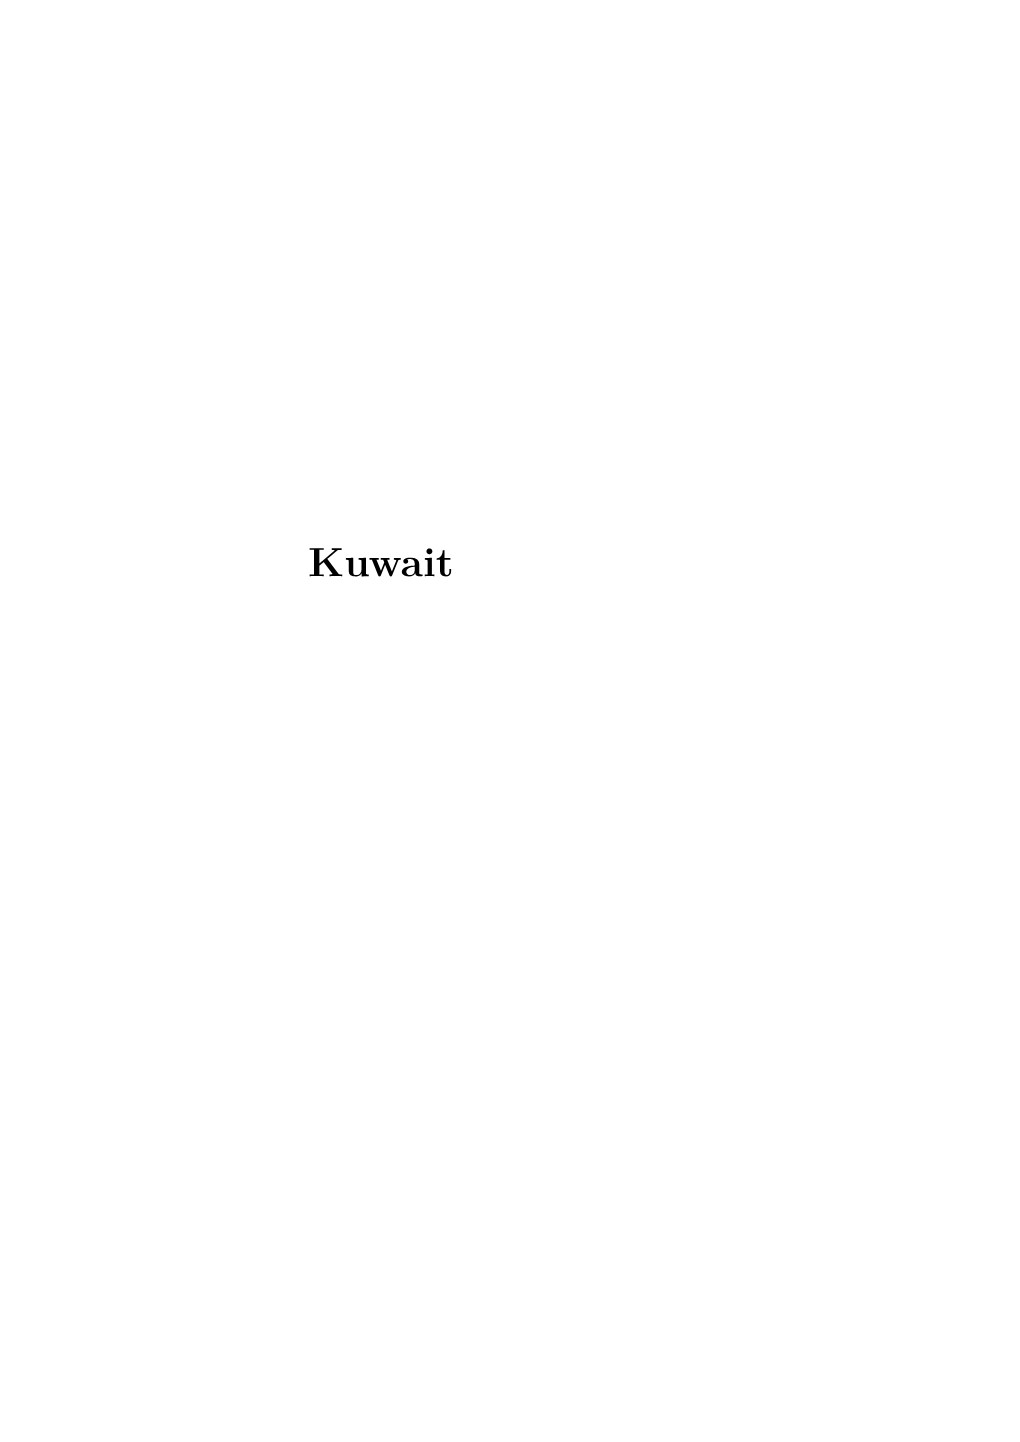 Political Status of Ethnic Groups in Kuwait